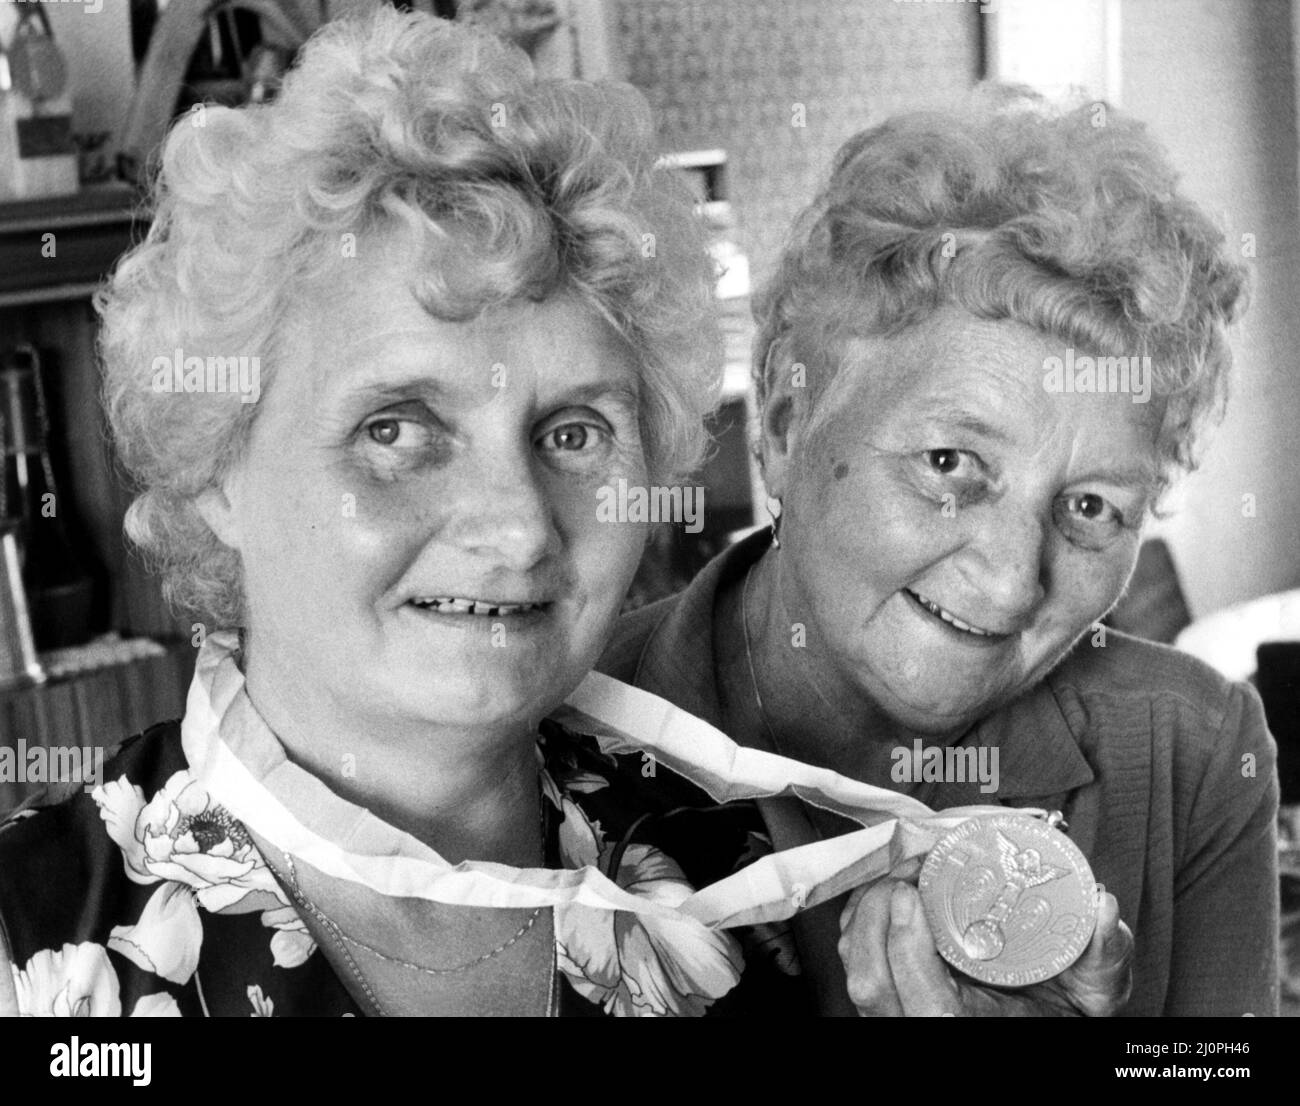 Athlete Steve Cram  Mia Cram and Maria Korte, mother and grandmother of Steve Cram, waiting to congratulate her son after he won the gold medal in the 1500 metres race at the World Athletic Championships in the Olympic Stadium in Helsinki, Finland 23 August 1983 Stock Photo